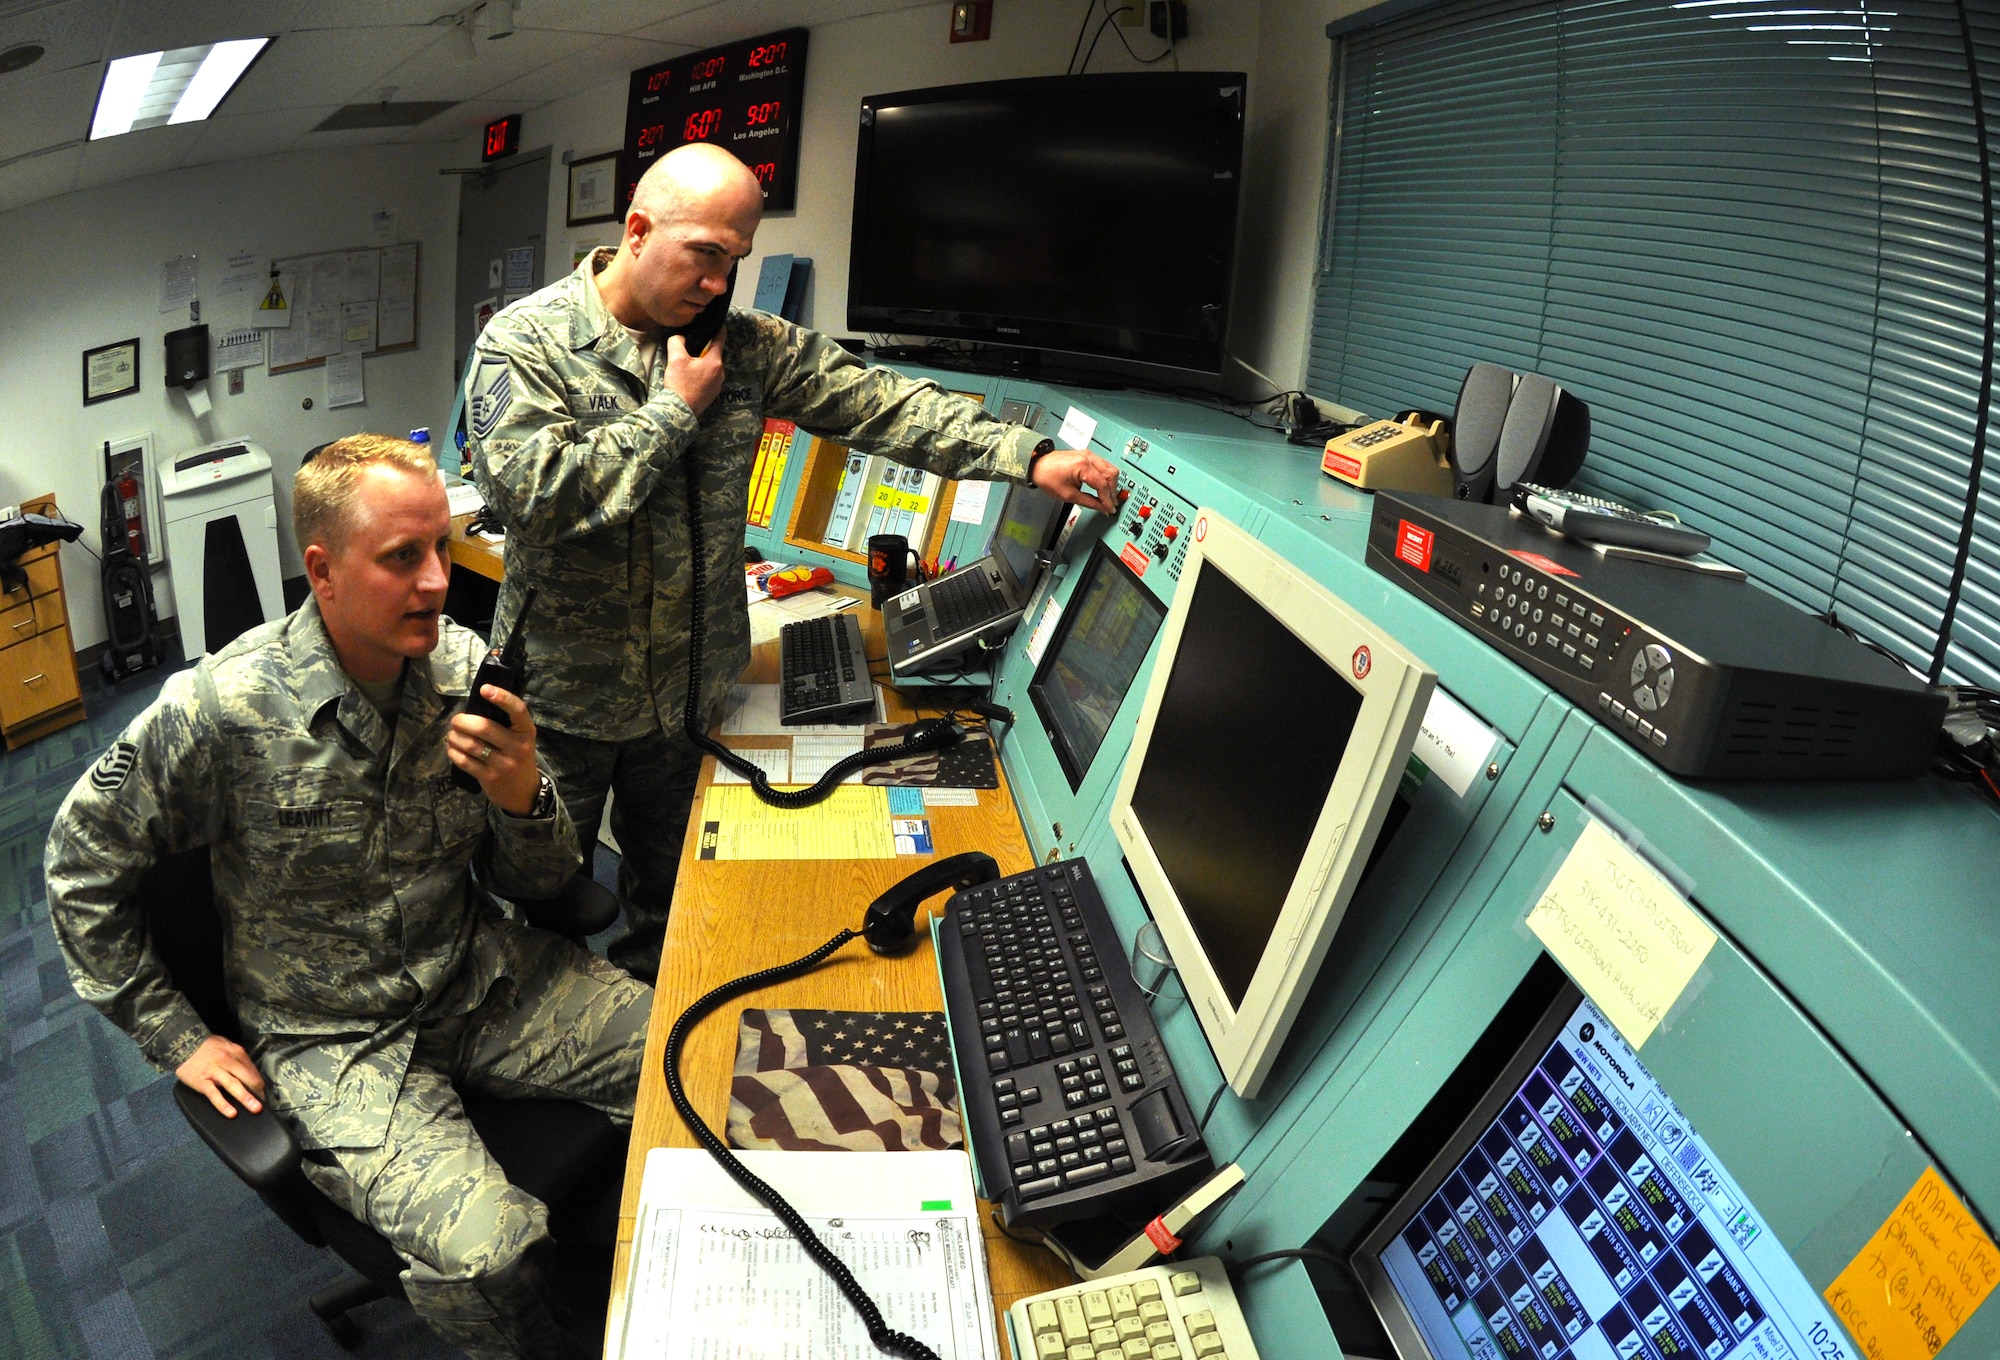 Tech. Sgt. Shane Leavitt, 419th Fighter Wing’s NCOIC of command post operations, works alongside 75th Air Base Wing counterpart Master Sgt. Bruce Valk, command post superintendant. Hill’s consolidated command post has earned accolades for their teamwork, as reserve and active-duty Airmen work side by side to support six commanders on base. (U.S. Air Force photo/Bryan Magaña) 